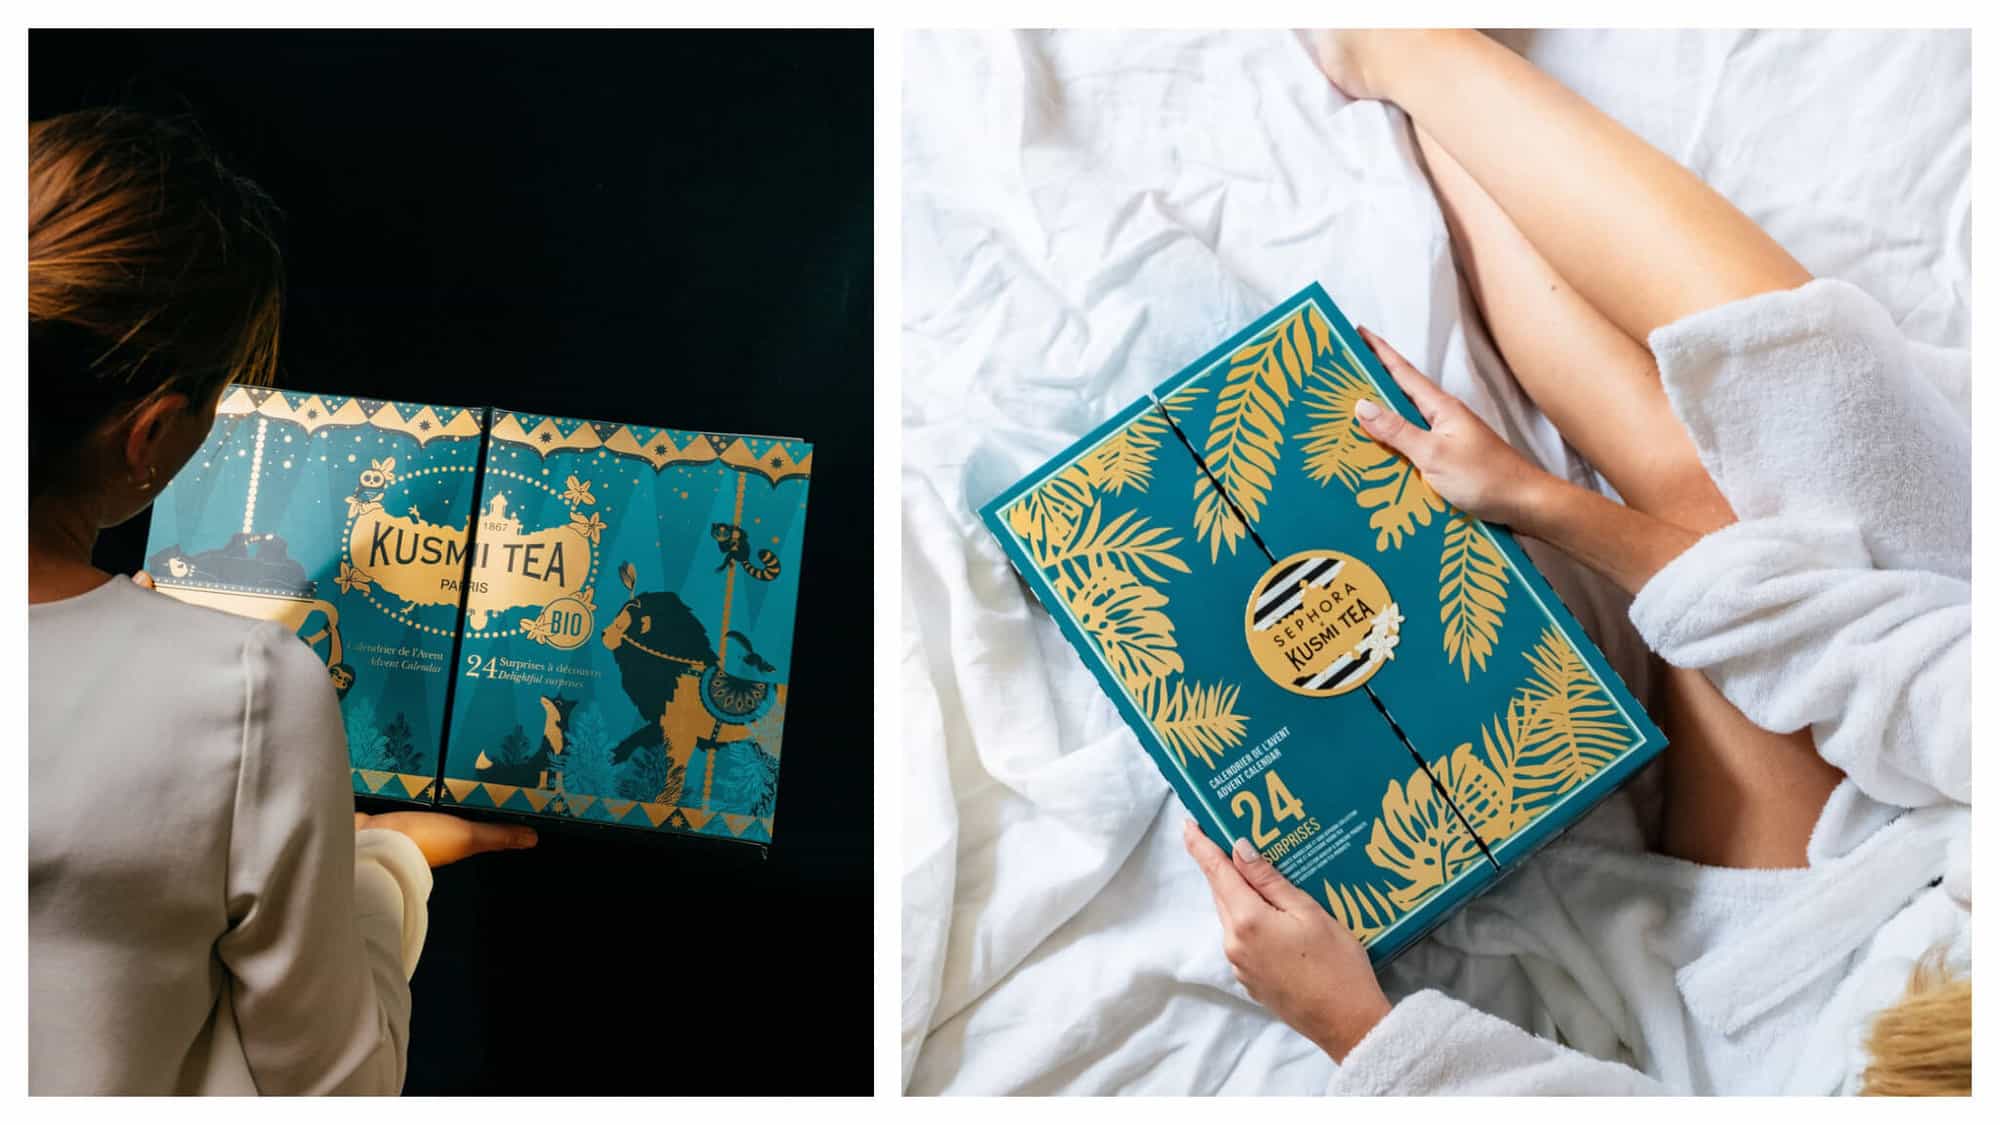 Left: a woman pictured from behind holds a turquoise and gold gift box from Kusmi Tea against a black background. Right a Woman in a white bathrobe sits on white sheets holding a turquoise and gold Kusmi tea gift box.